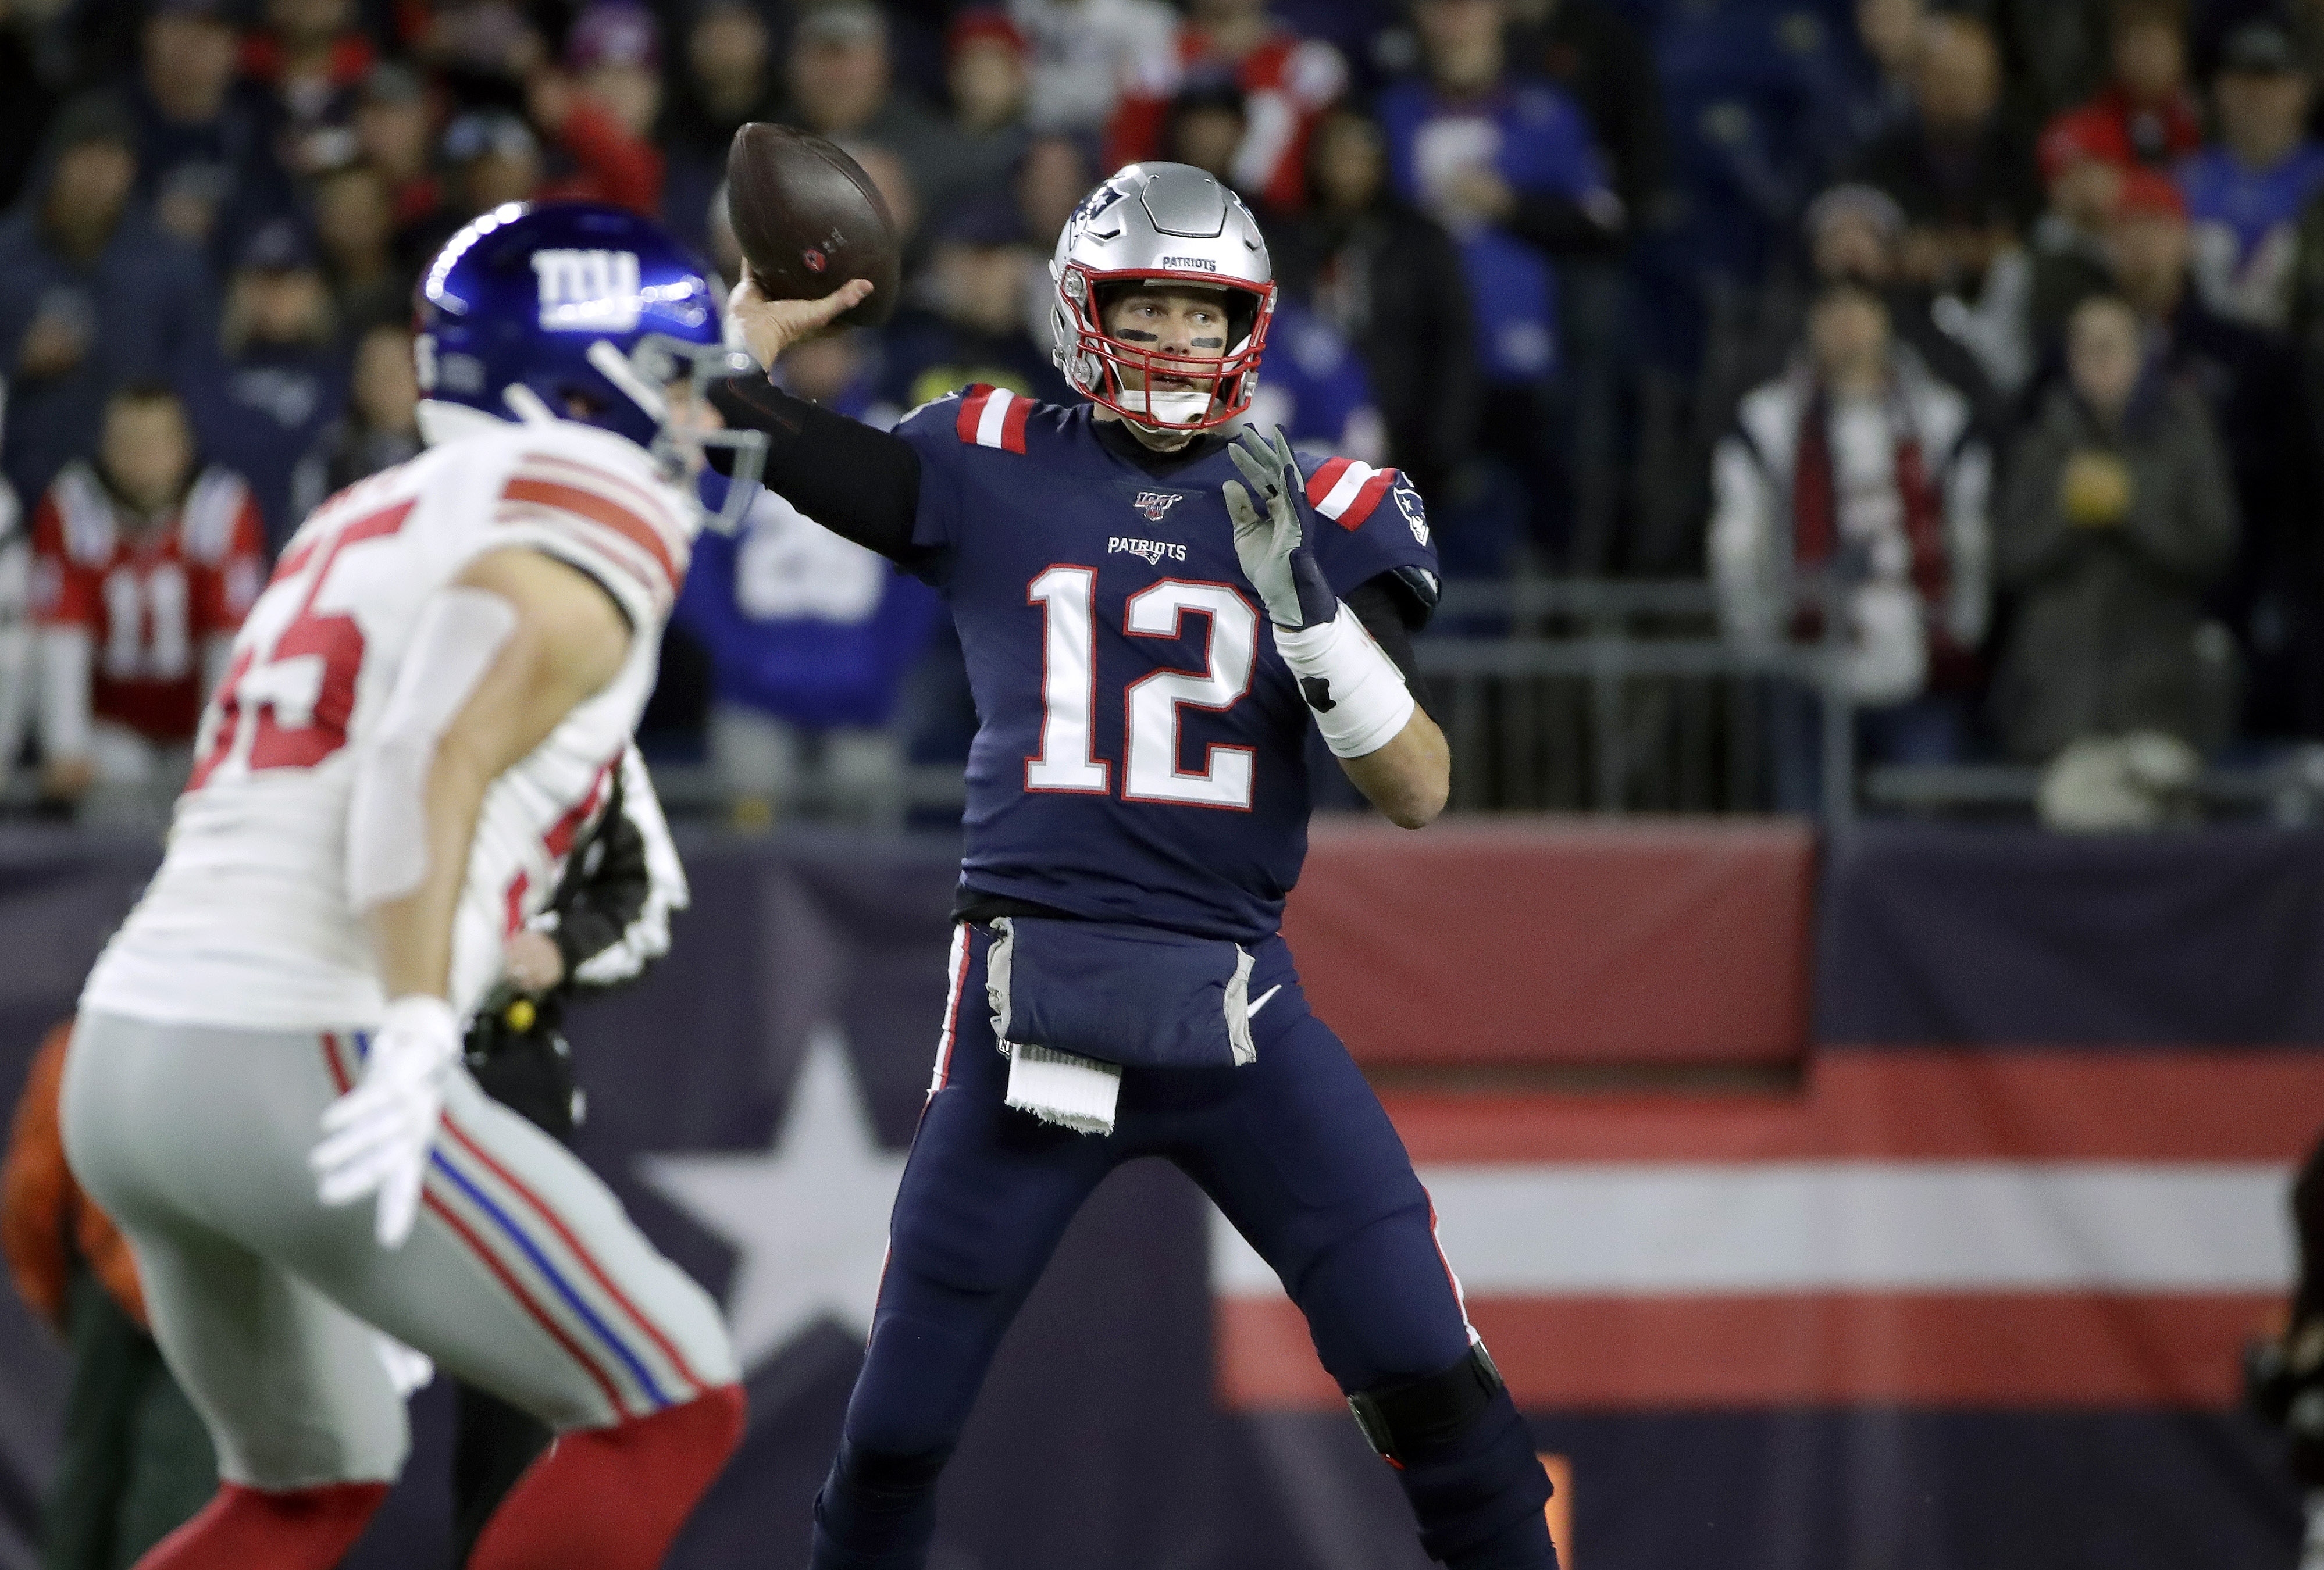 Pats win, but injuries and offensive execution are concerns